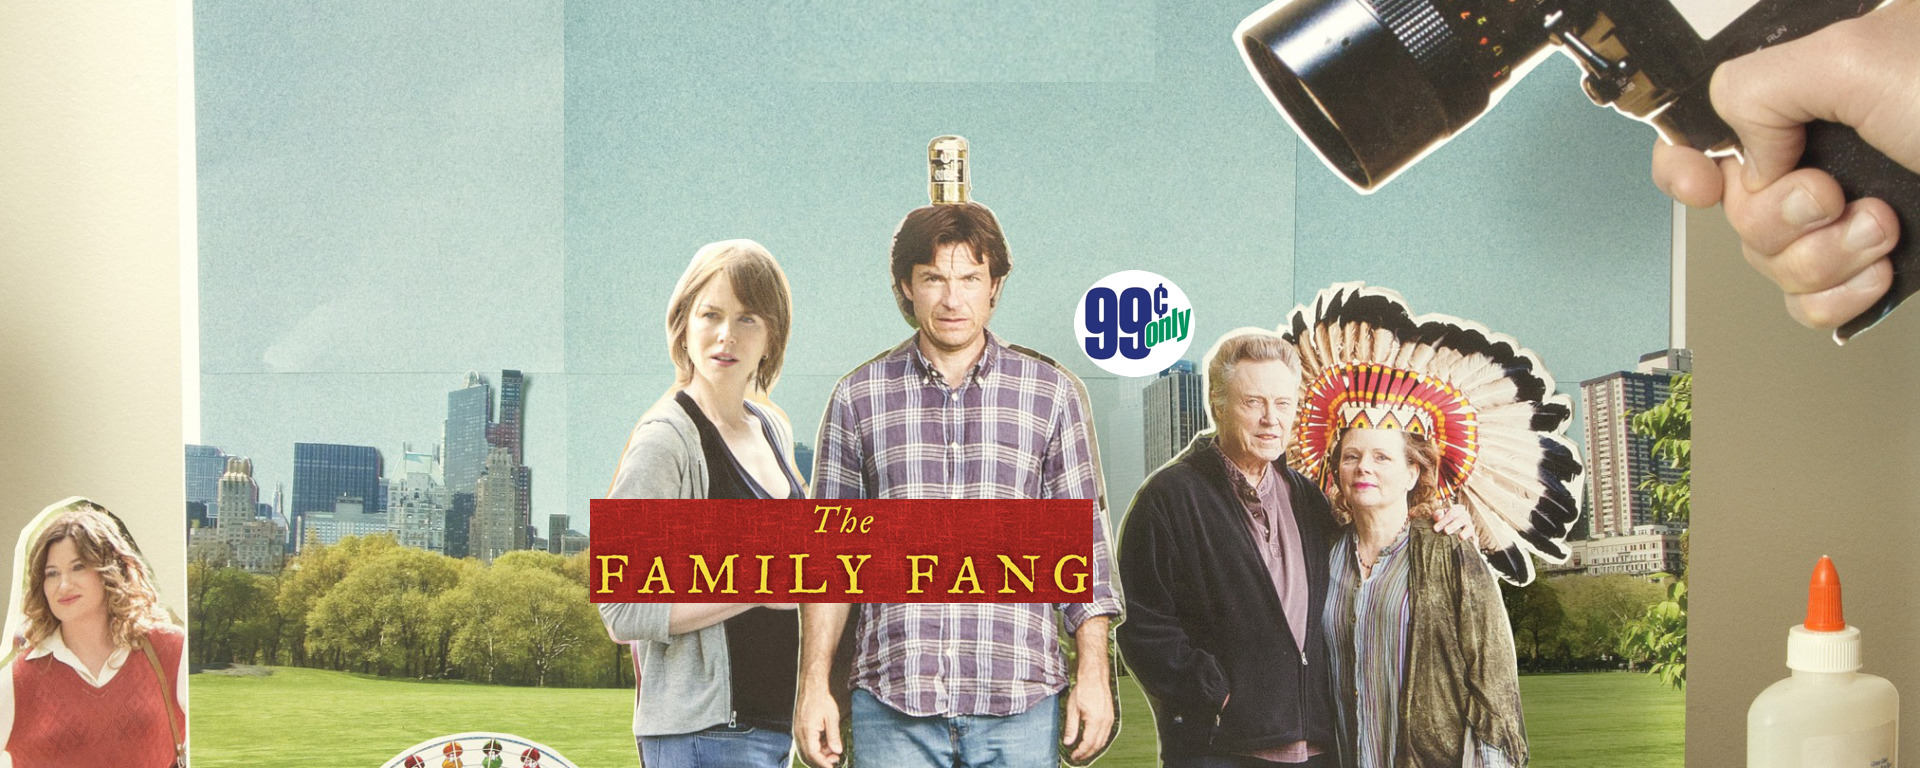 The itunes 99 cent movie of the week: ‘the family fang’